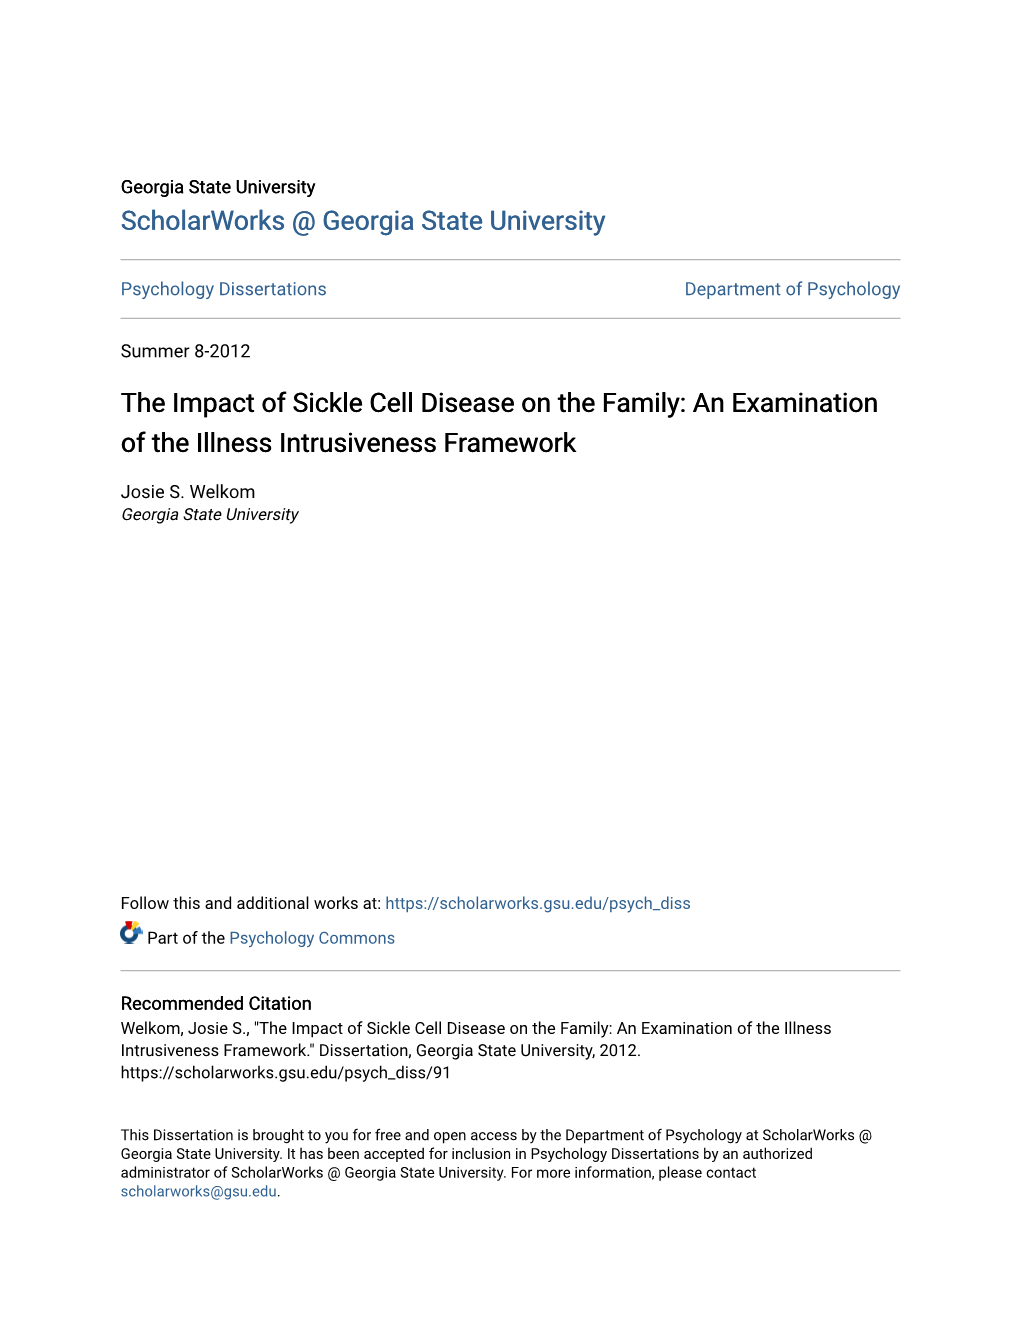 The Impact of Sickle Cell Disease on the Family: an Examination of the Illness Intrusiveness Framework